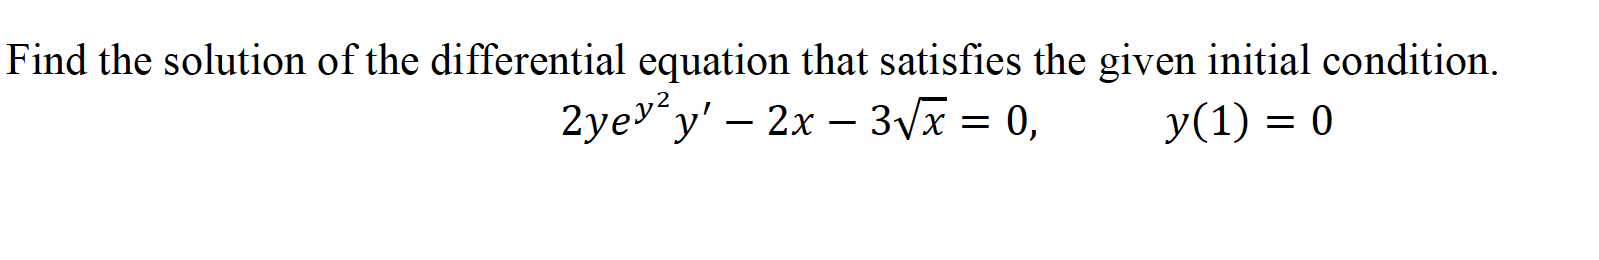 Find the solution of the differential equation that satisfies the given initial condition.
2yev'y' – 2x – 3Vx = 0,
у (1) %3D 0
-
